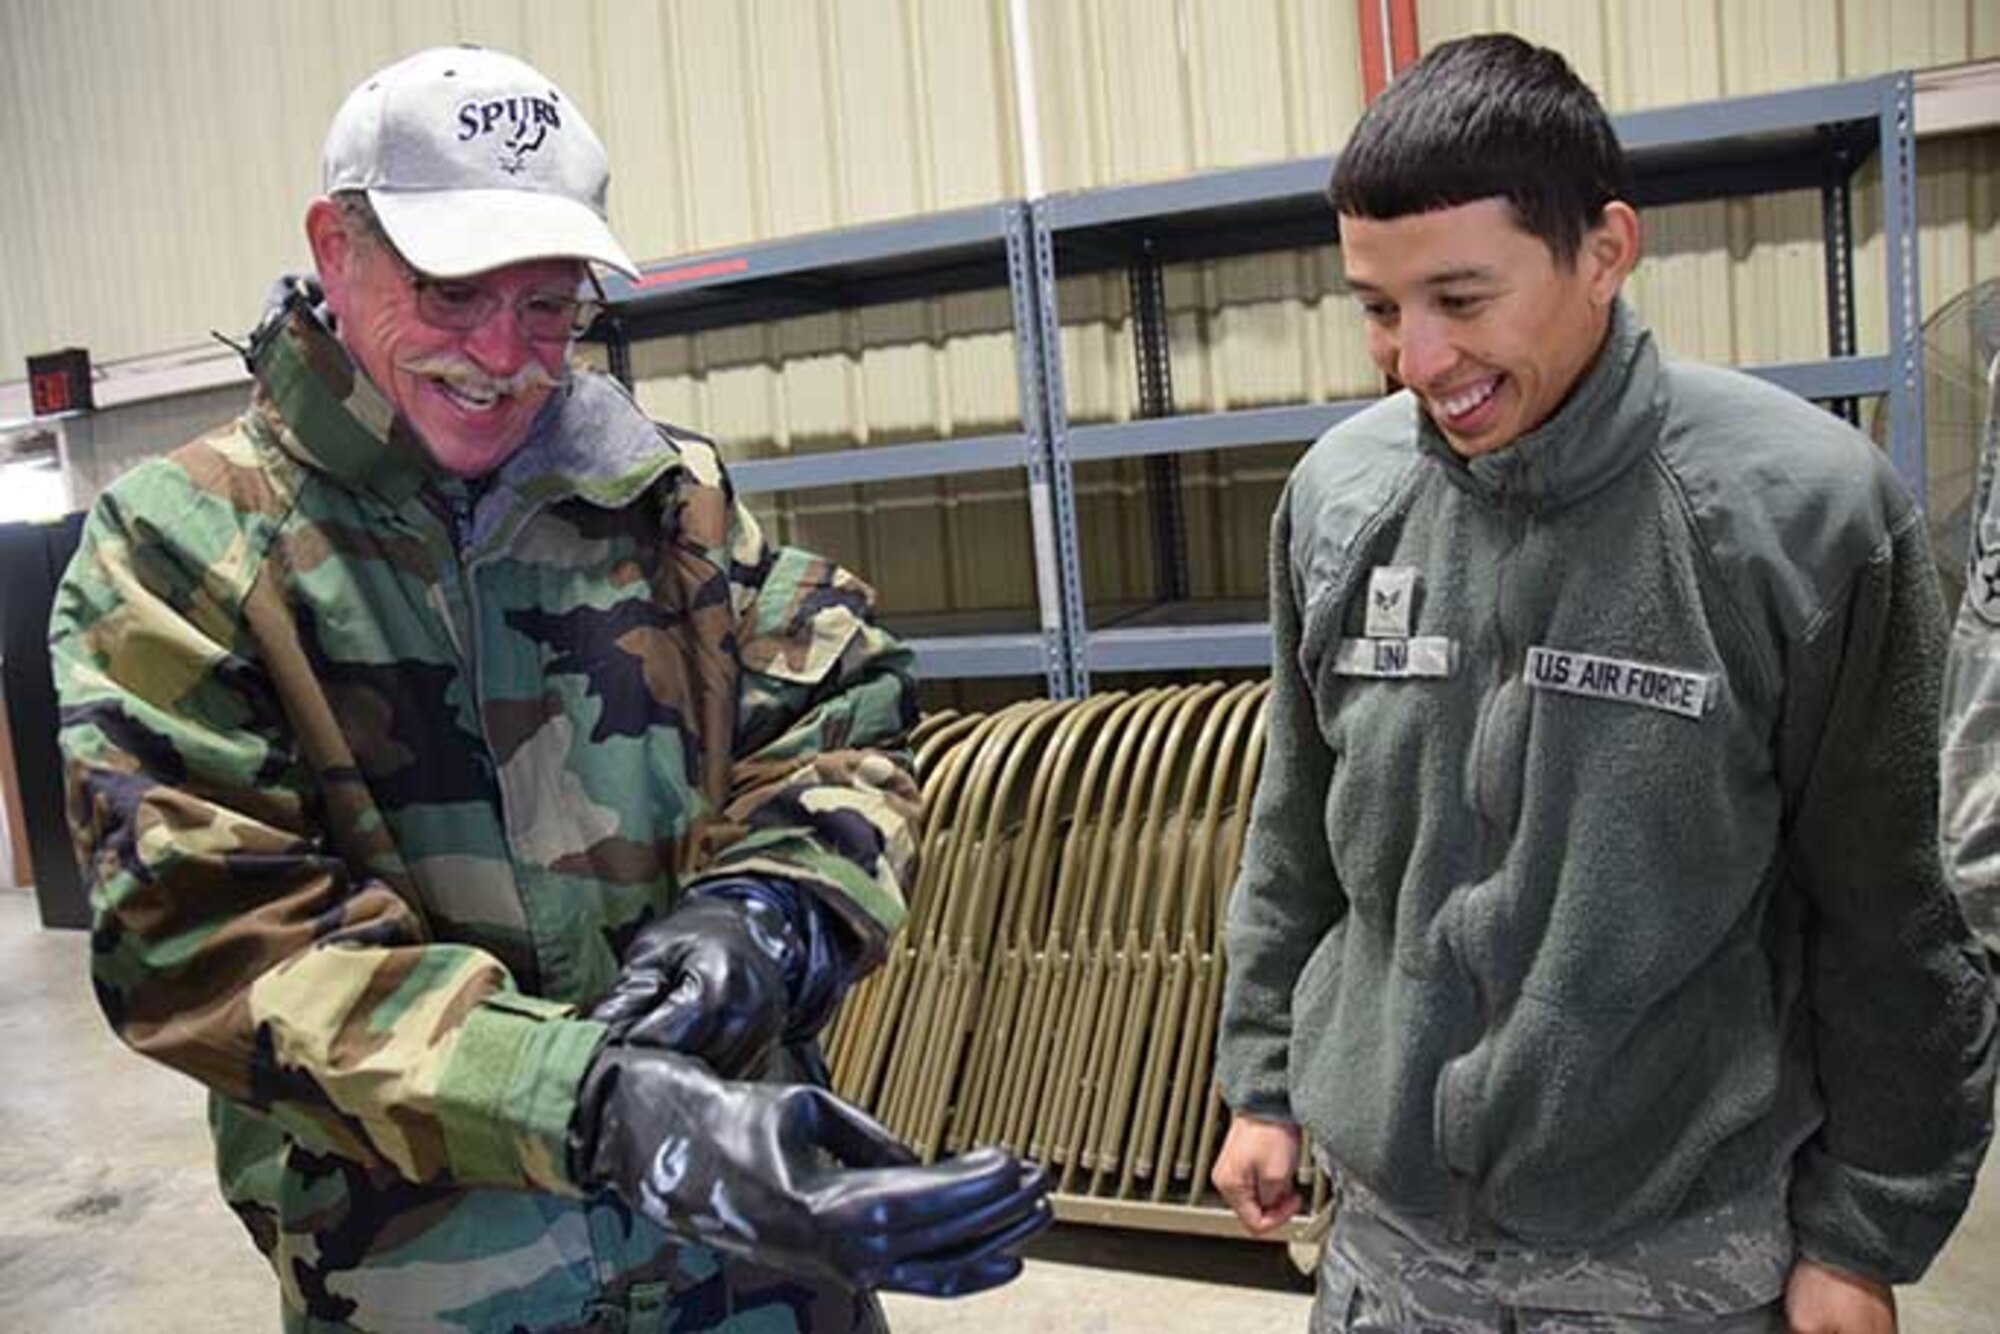 Steve Richmond, an alumni of the Honorary Commander’s program, adjusts the gloves of his chemical warfighter under the supervision of Senior Airman Michael Luna, transportation specialist with the 433rd Force Support Squadron during a mock deployment Jan. 7, 2017 at Joint Base San Antonio-Lackland, Texas.  The logistics readiness demonstration was a portion of the 433rd Airlift Wing Honorary Commanders program tour of the 433rd Mission Support Group. (U.S. Air Force photo/Tech. Sgt. Carlos J. Trevino)